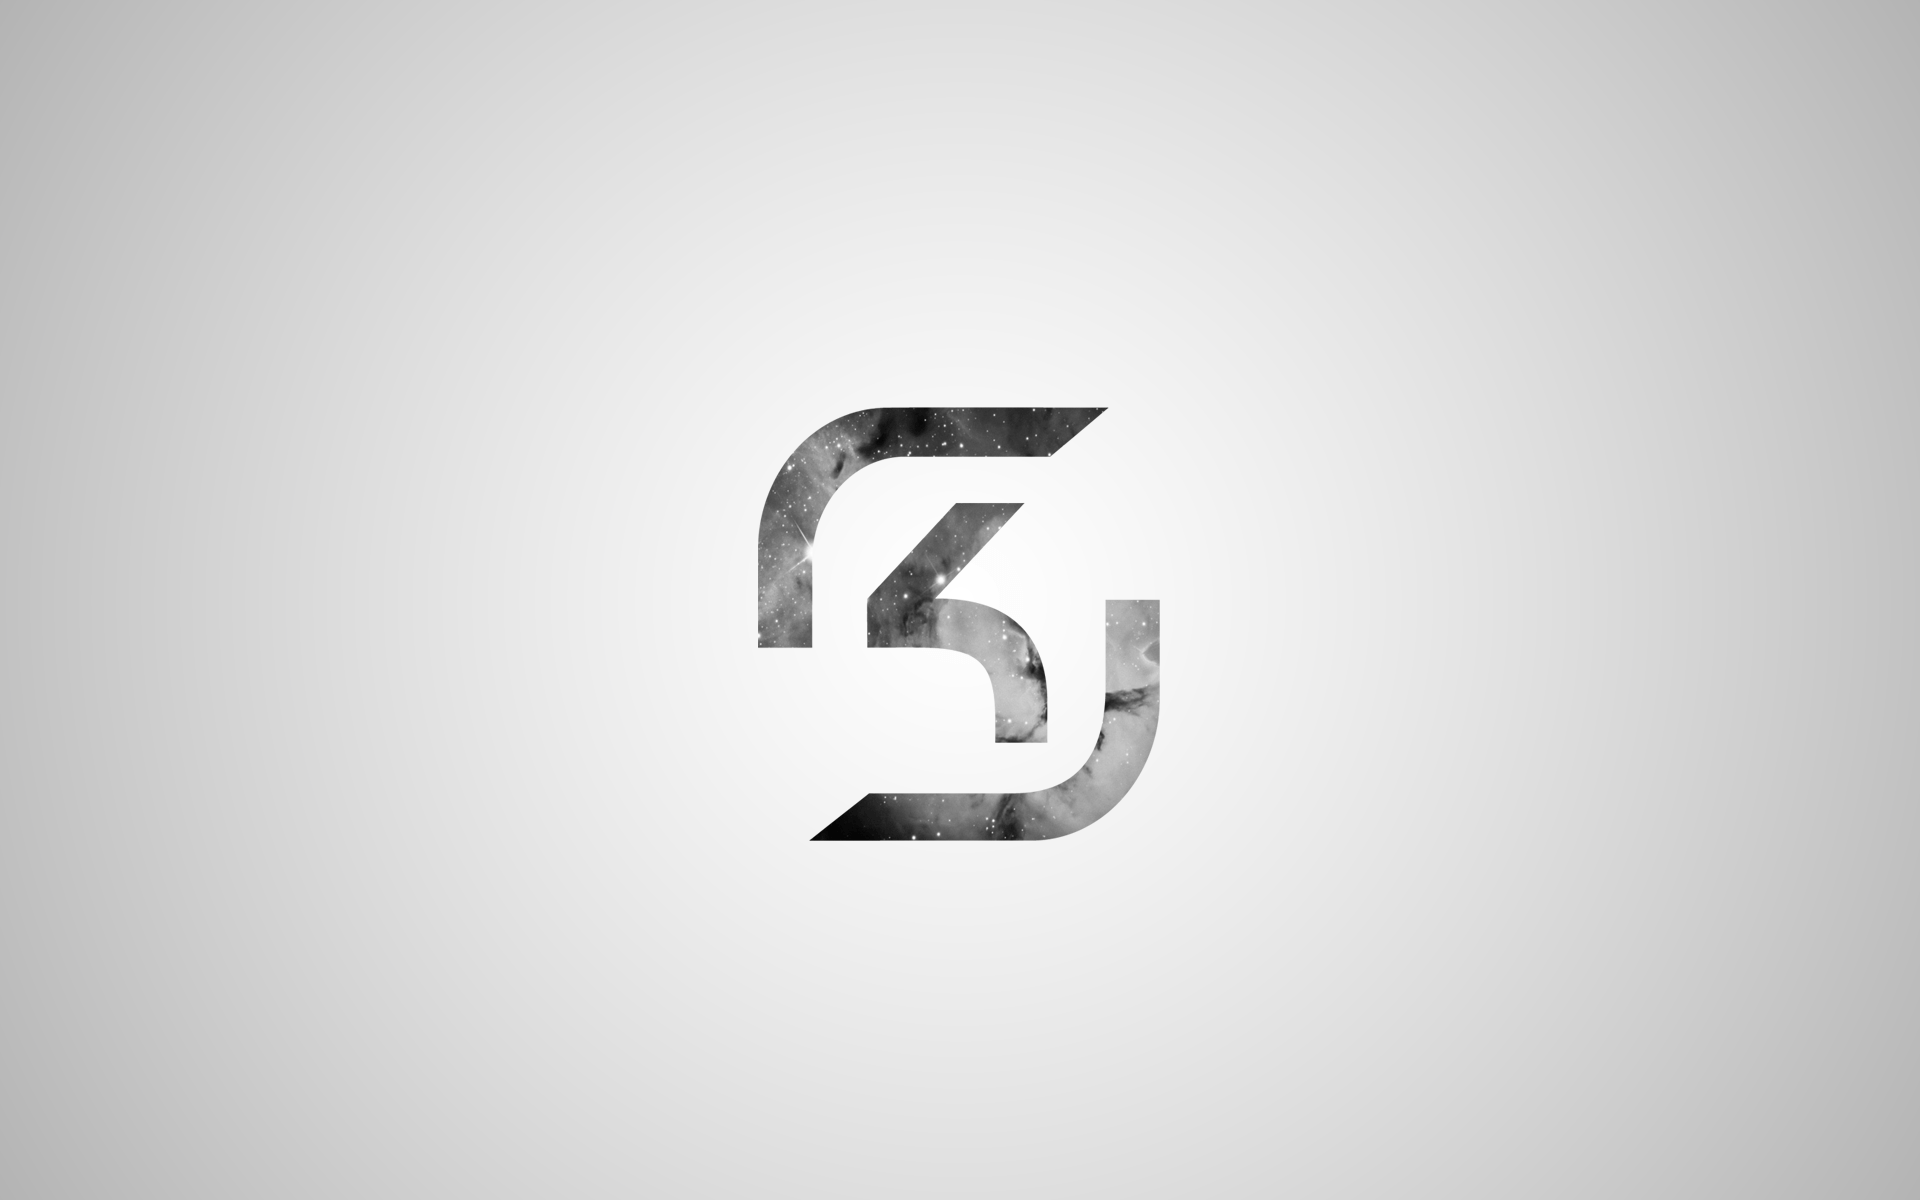 SK GAMING GALAXY. CS:GO Wallpaper and Background